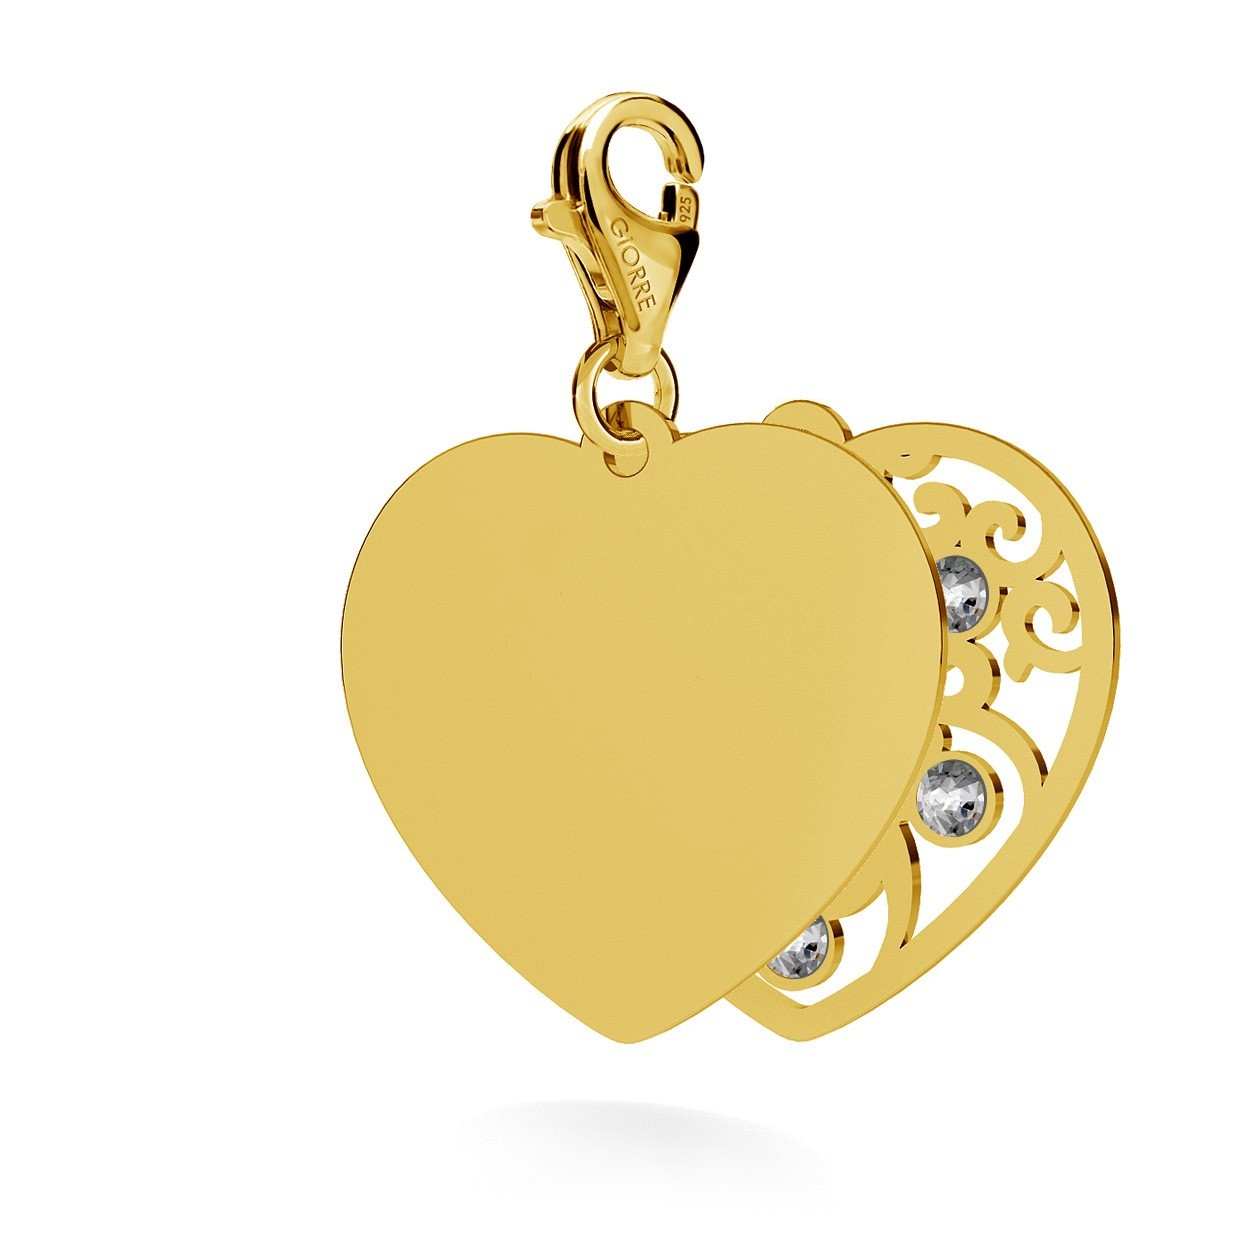 CHARMS 203, TWO HEARTS WITH ENGRAVING, SWAROVSKI